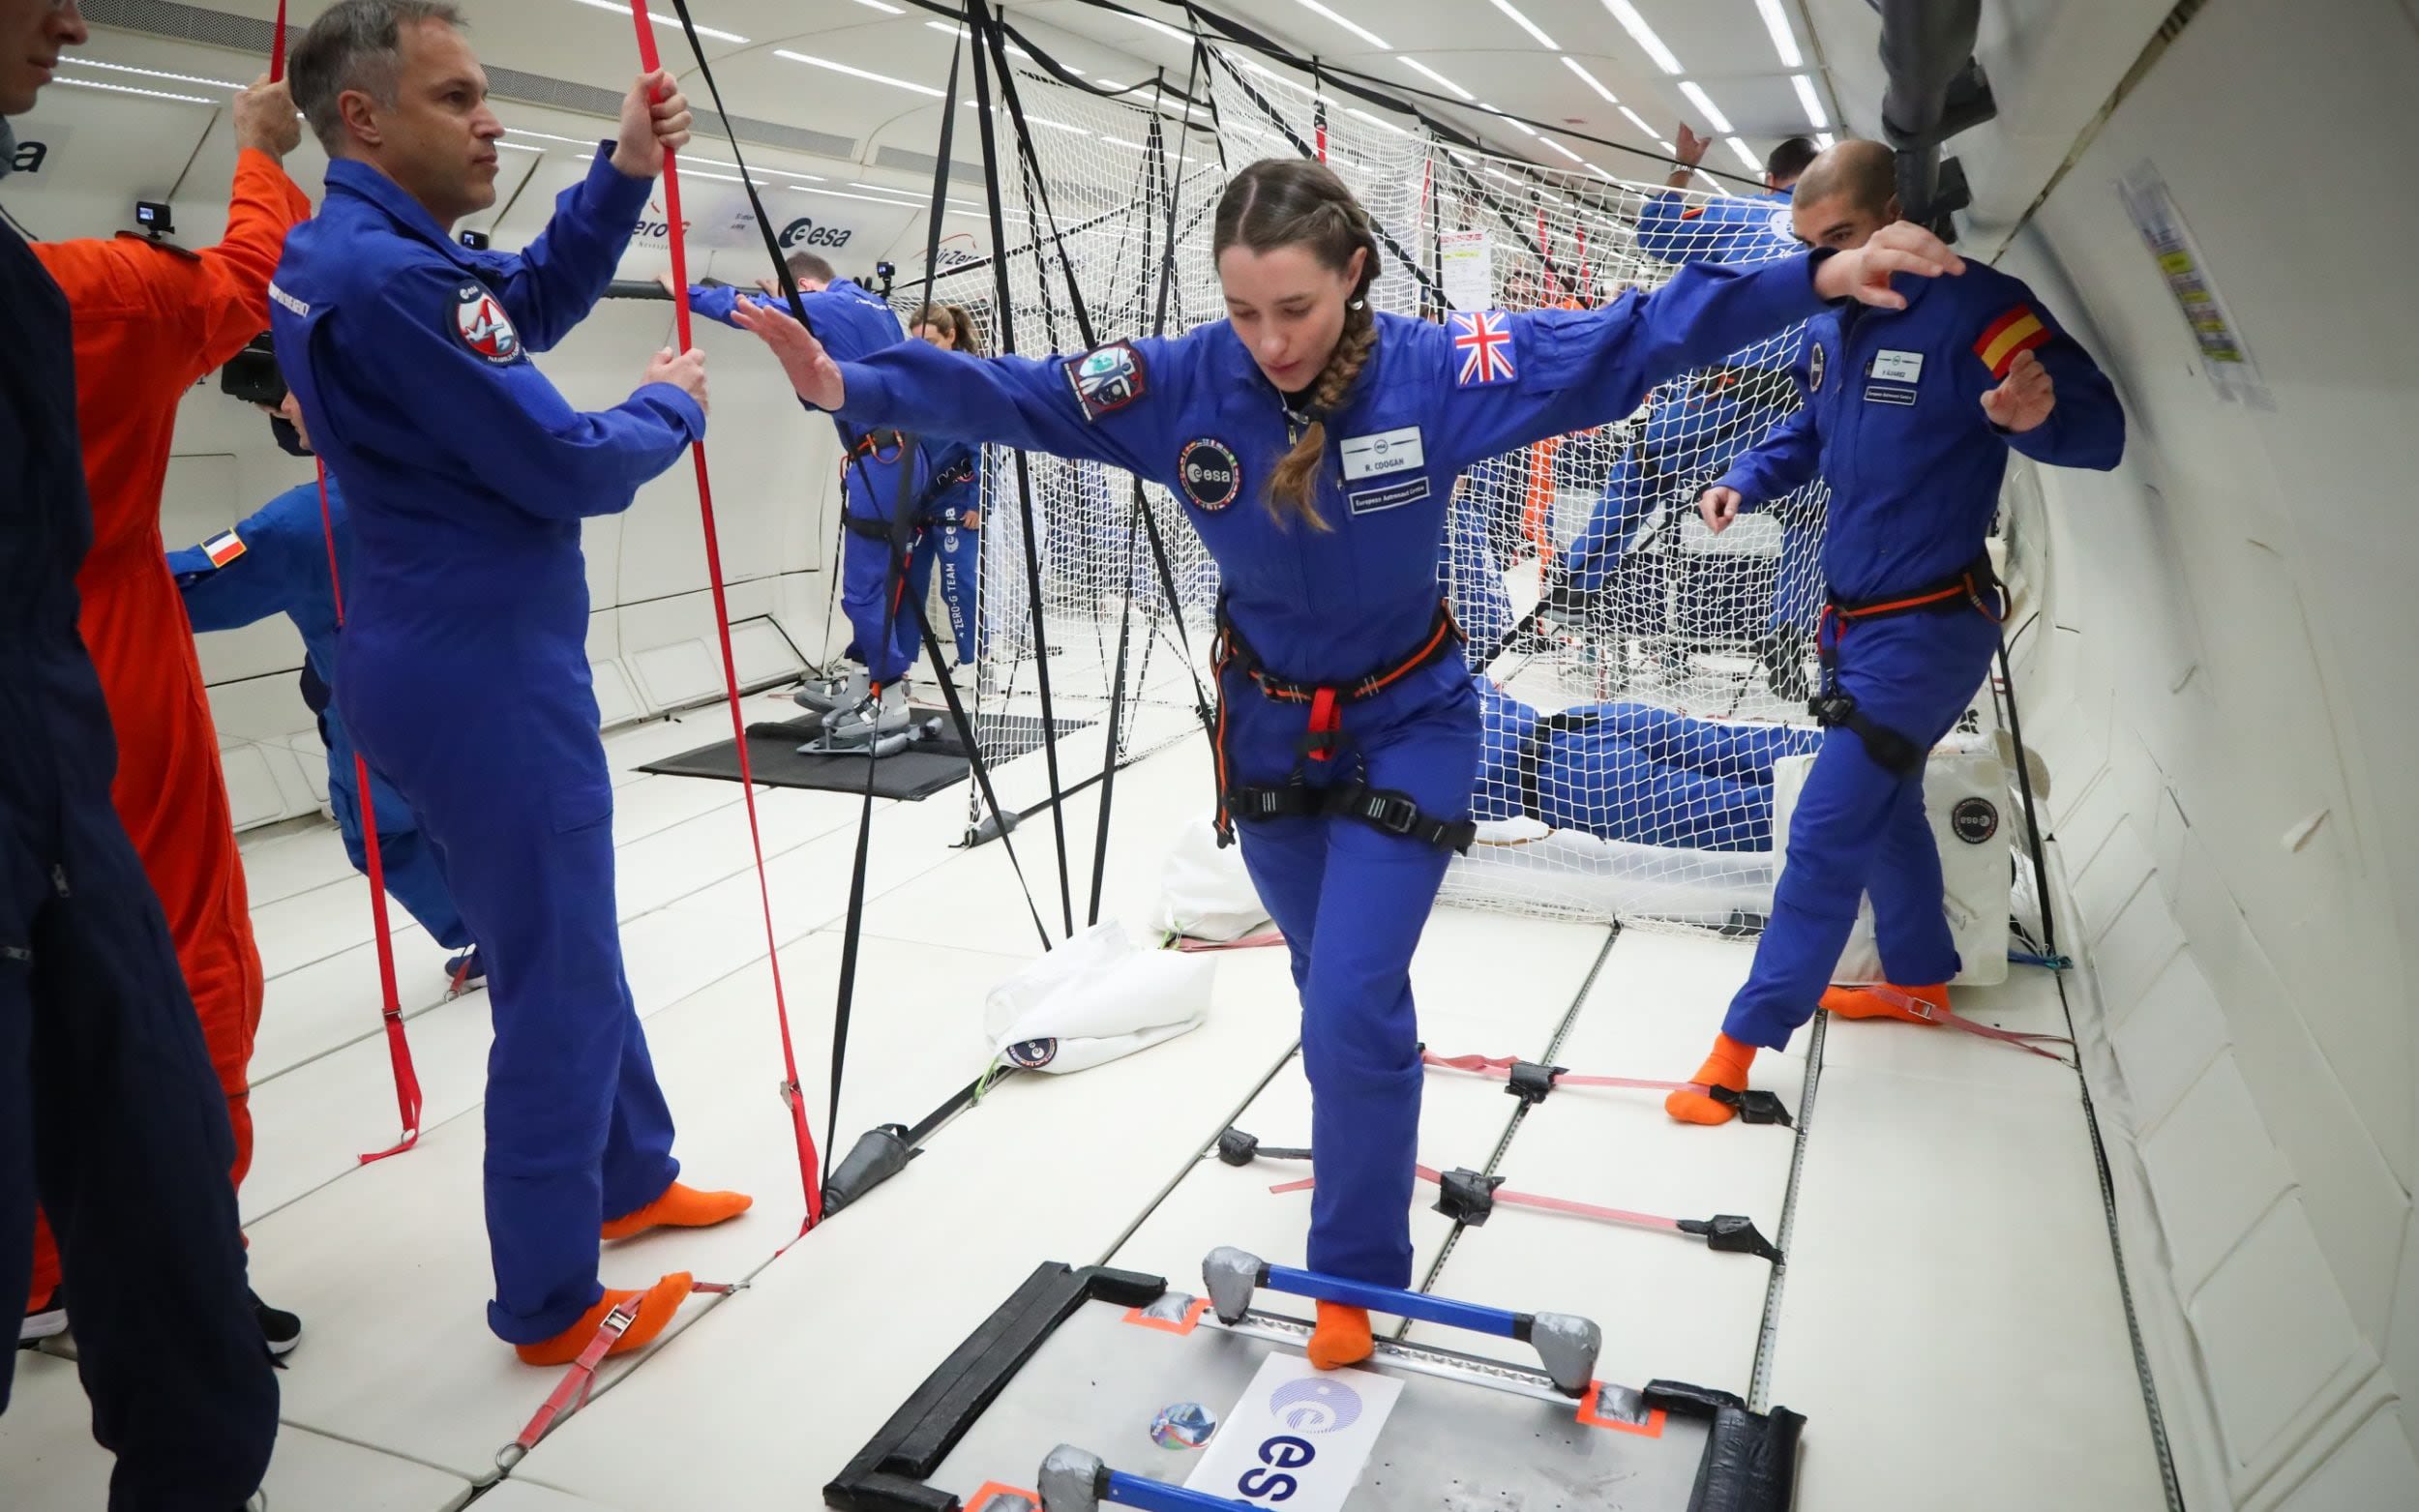 Britain’s newest astronaut sets her sights on Mars